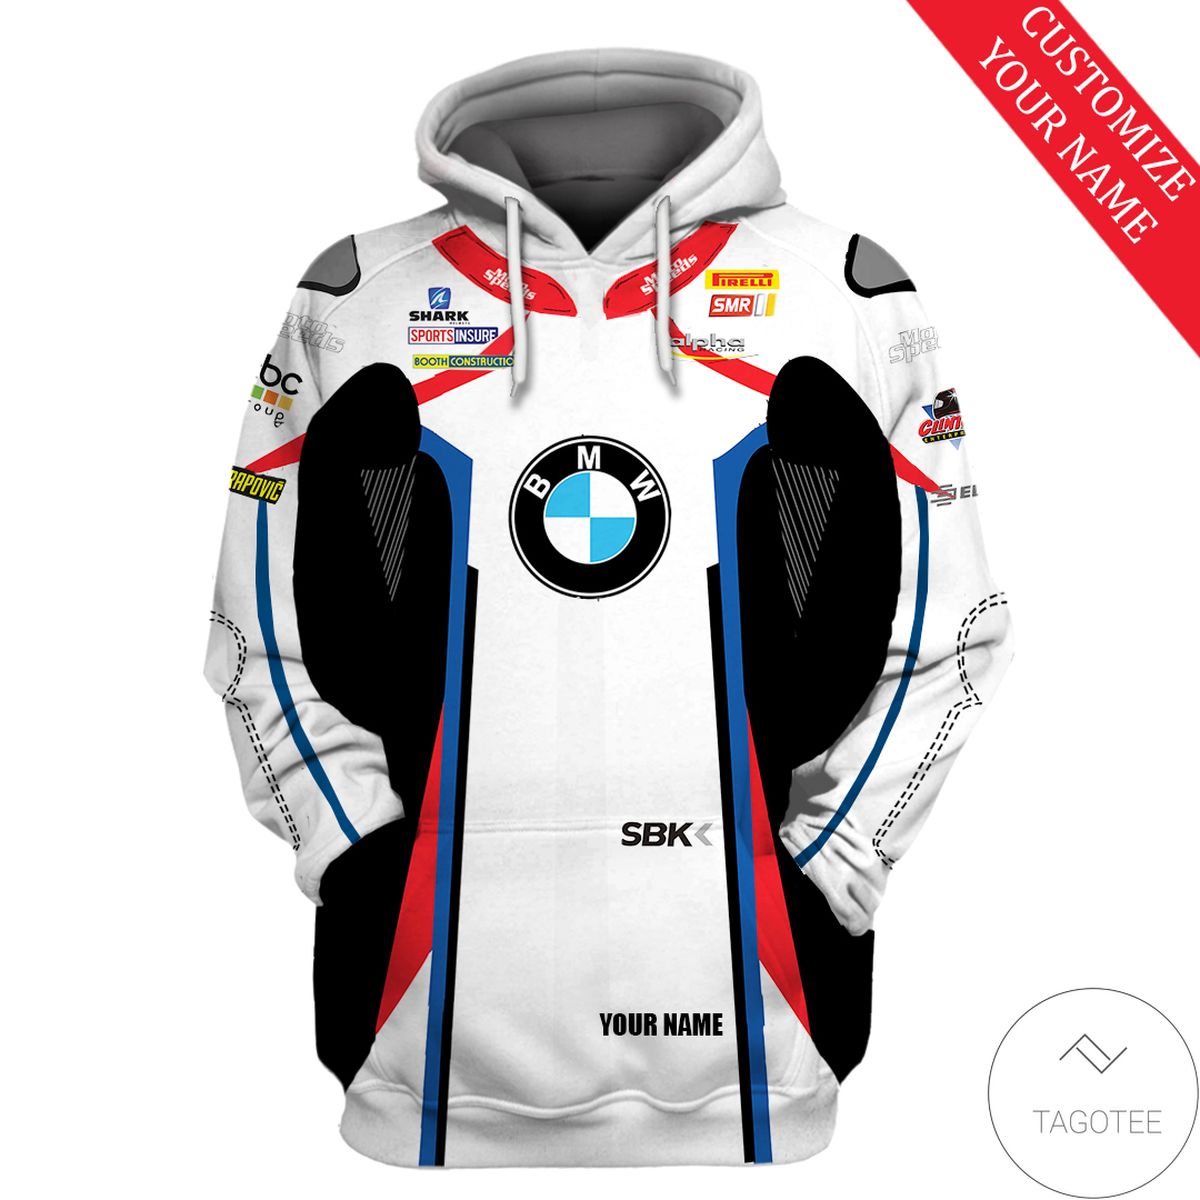 Personalized Bmw Rallying Branded Unisex 3d Hoodie